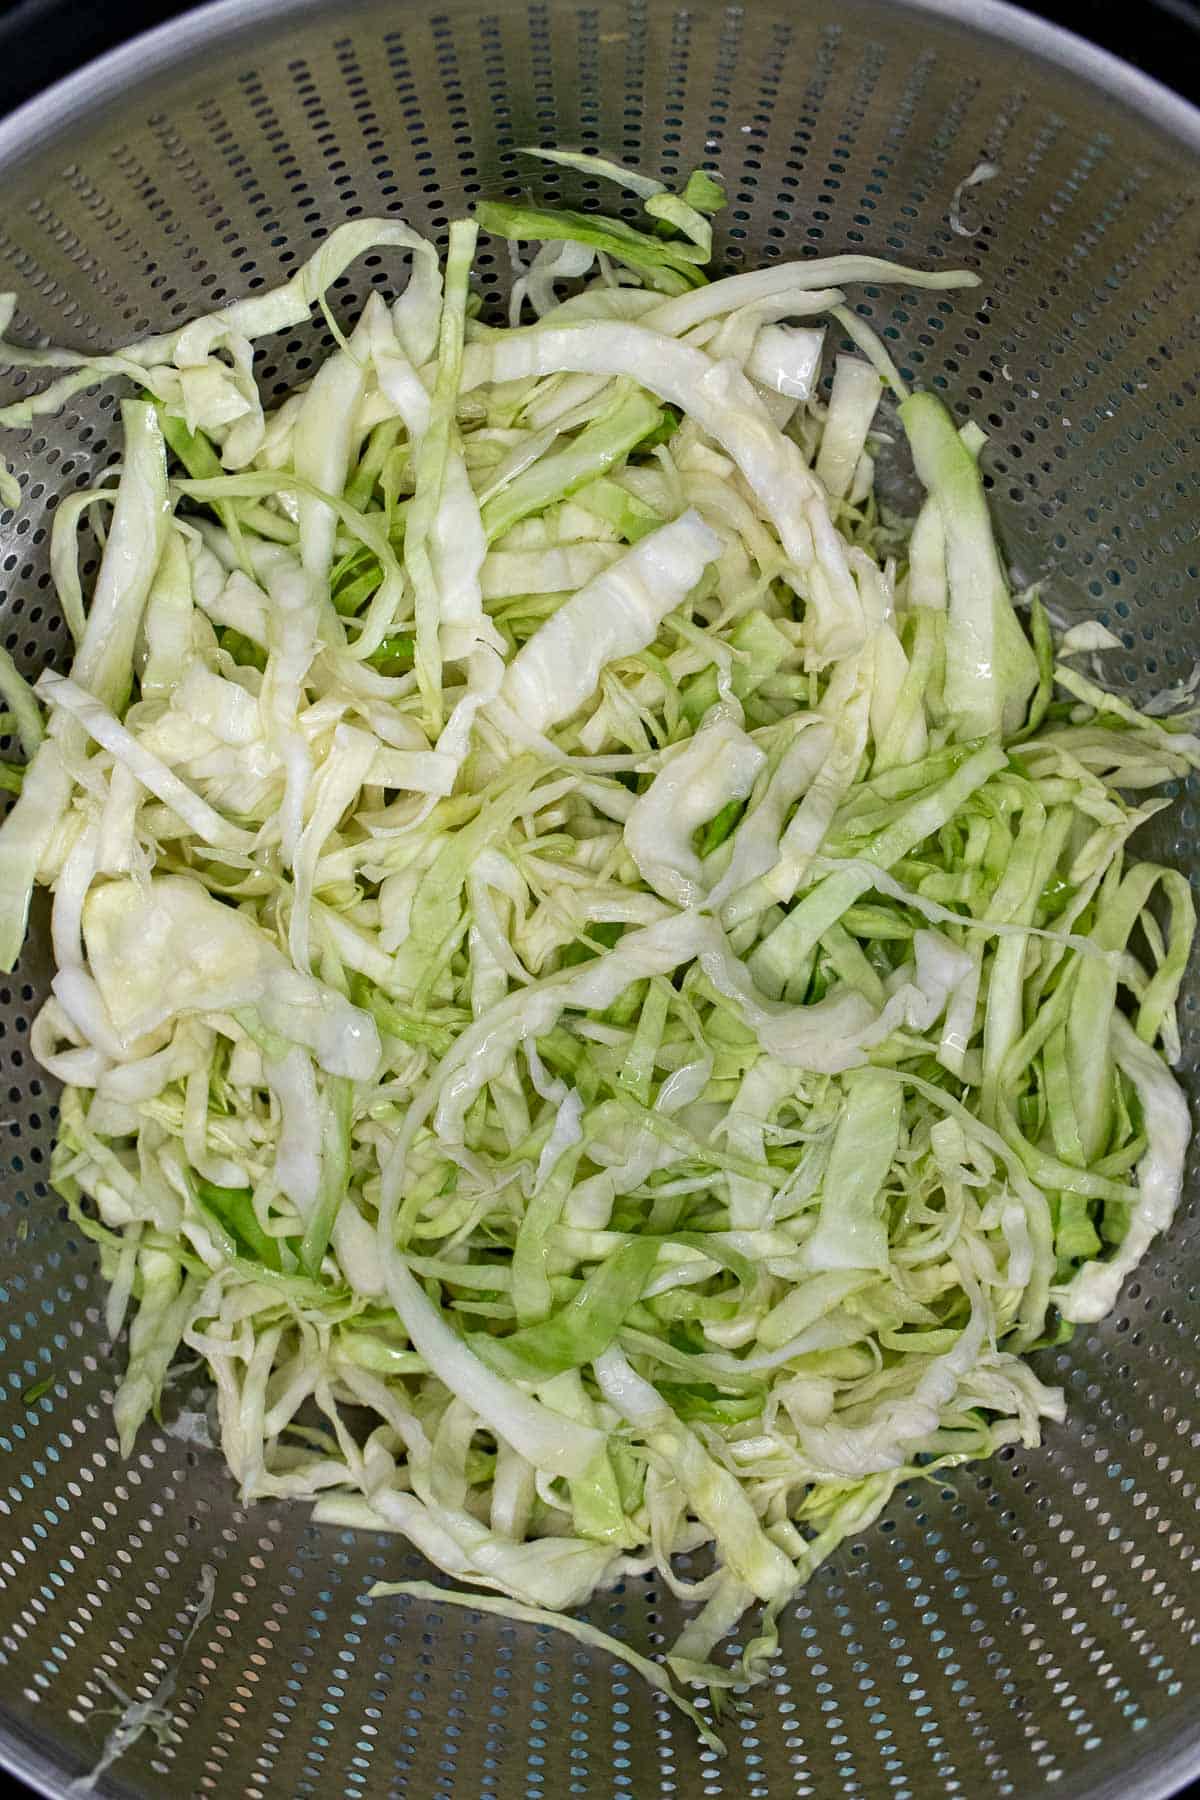 Shredded cabbage salted and draining.